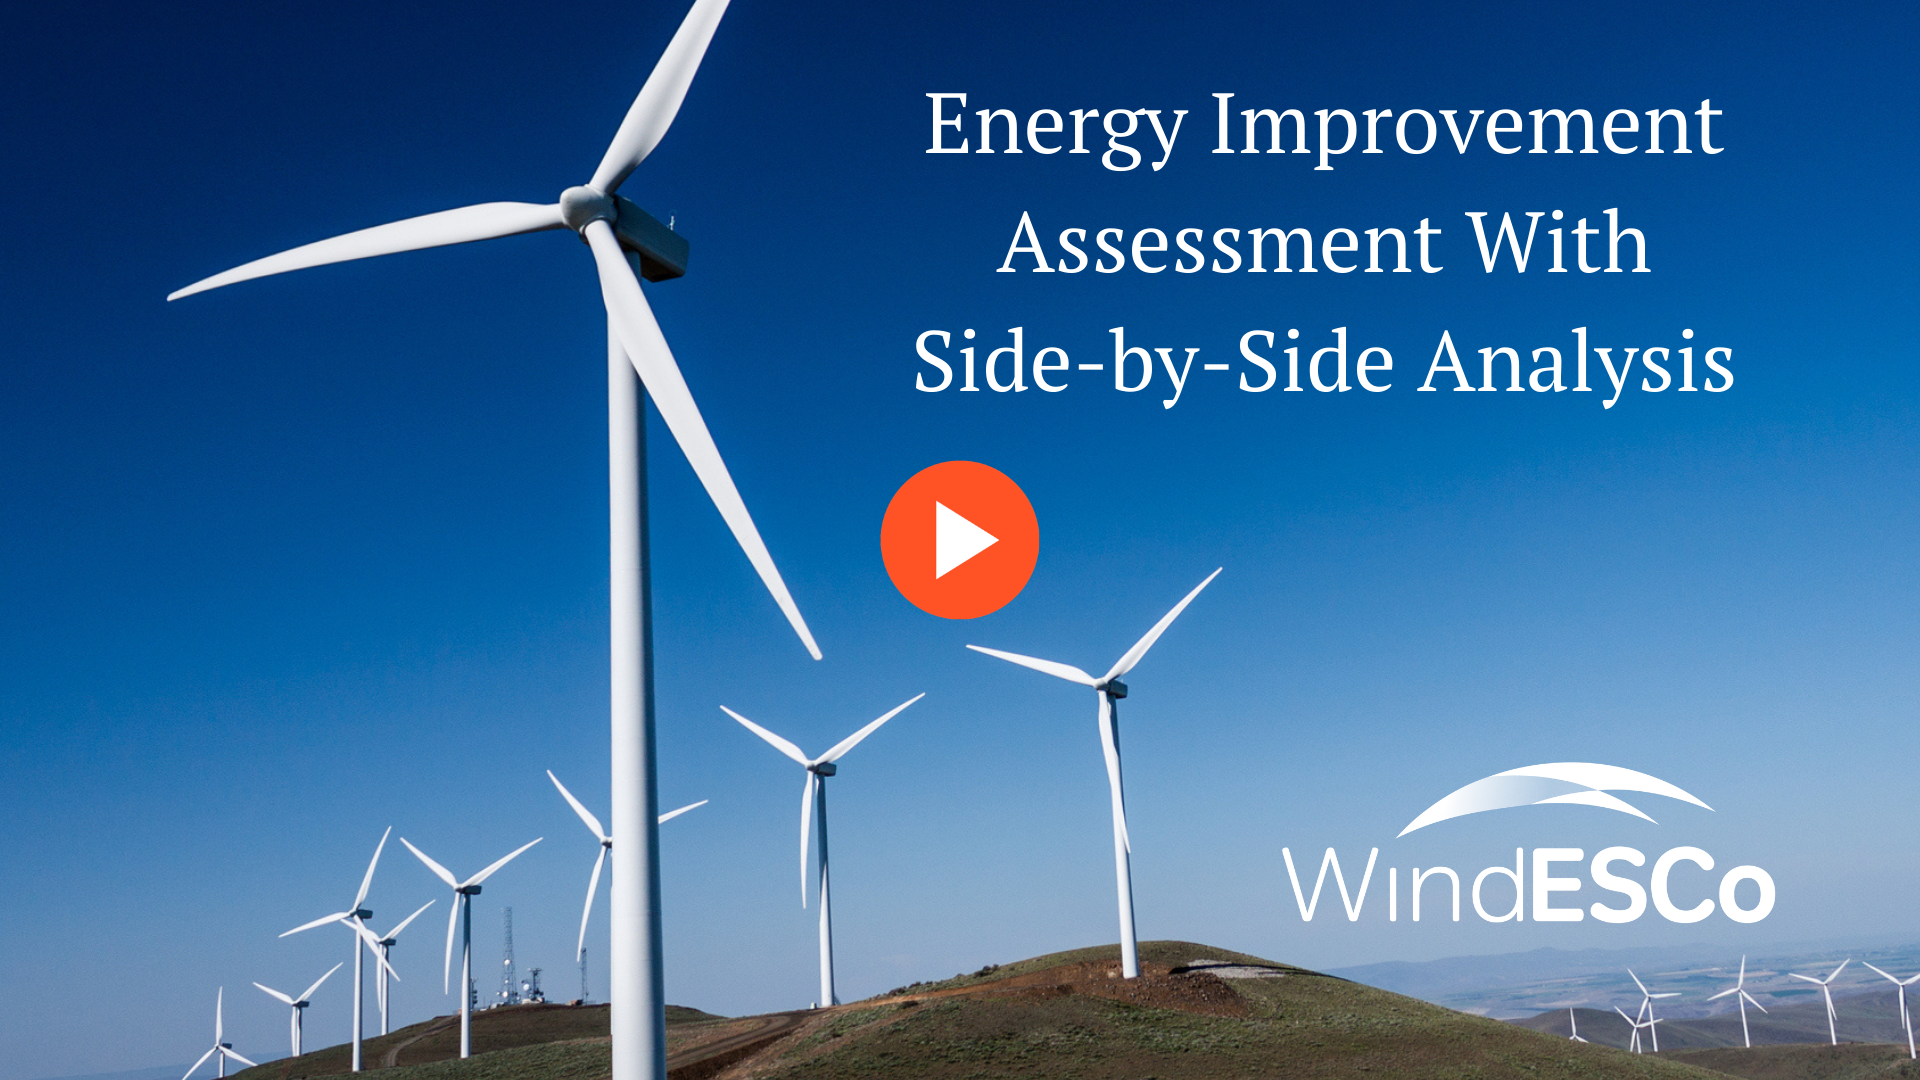 Energy Improvement Assessment With Side-by-Side Analysis